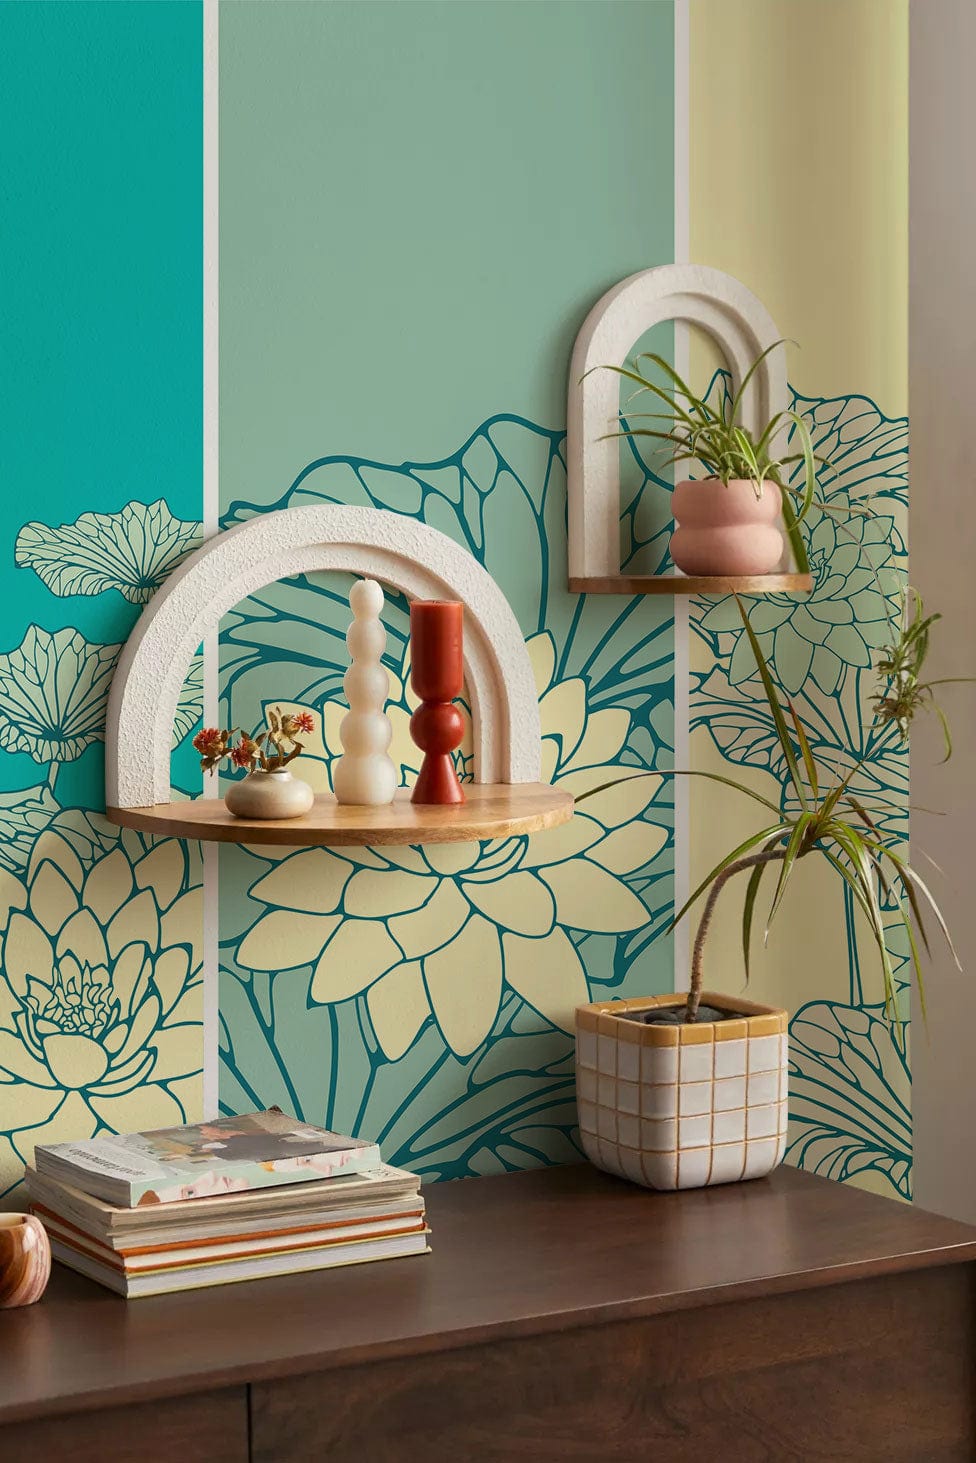 Paint and Wallpaper Mural in the Design of a Turquoise 